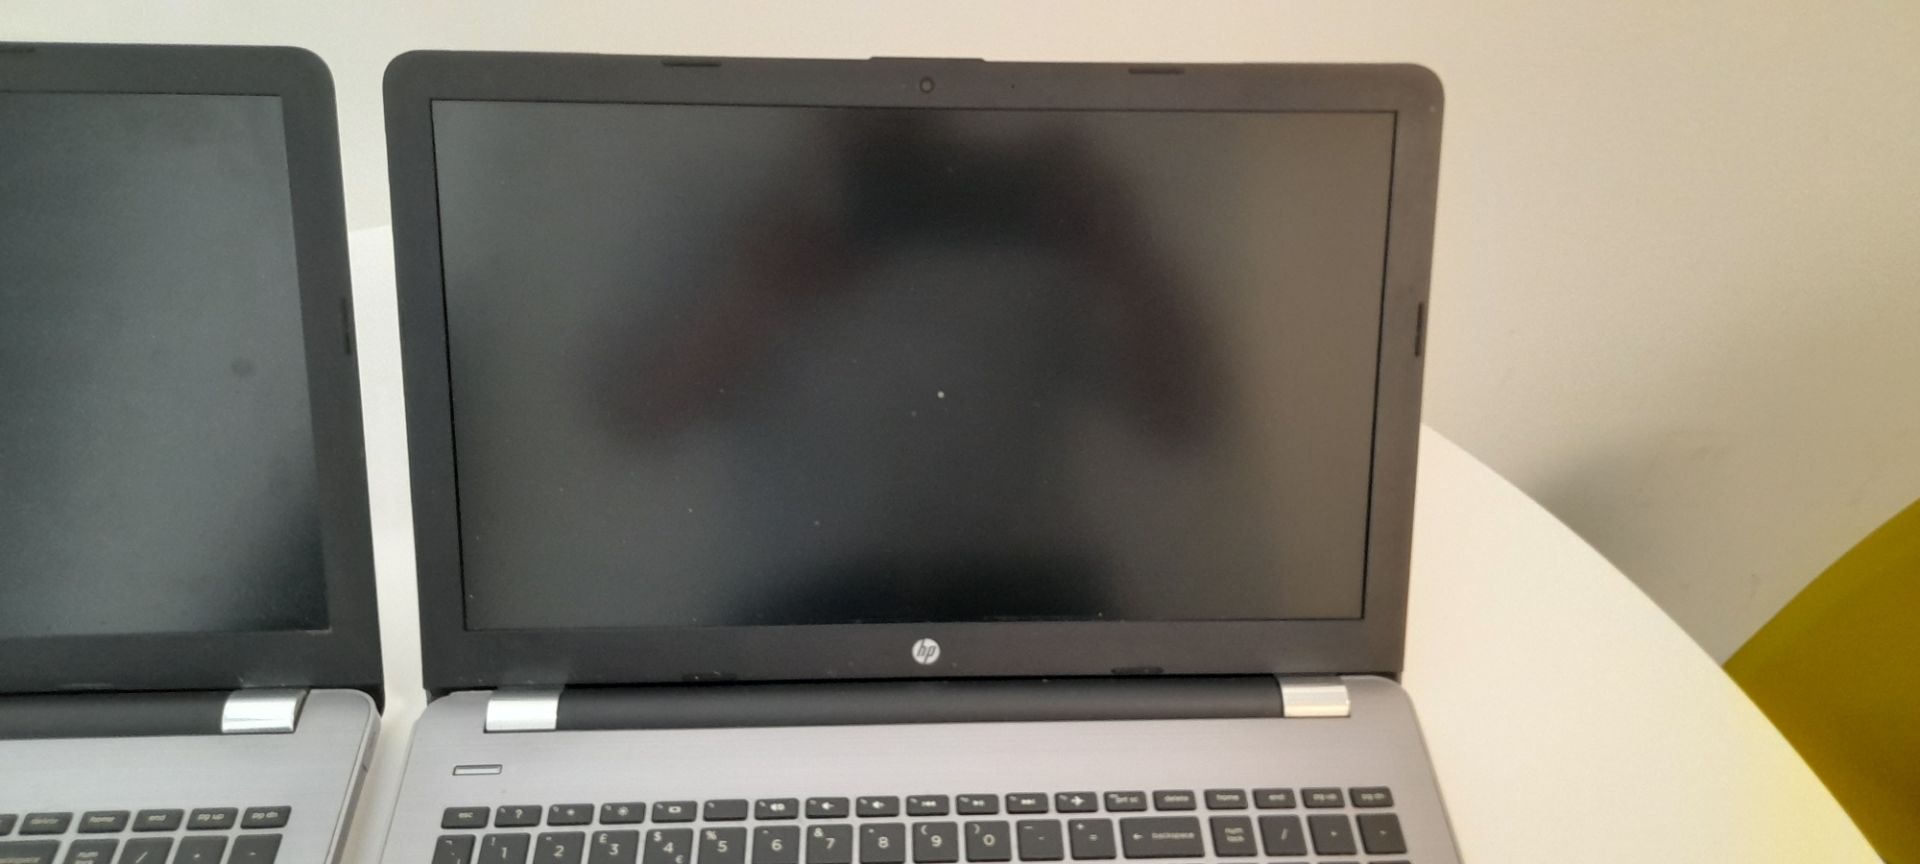 2x HP 3168NGW laptop with intel core i7, 7th Gen. Collection from Canary Wharf, London, E14 - Image 8 of 12